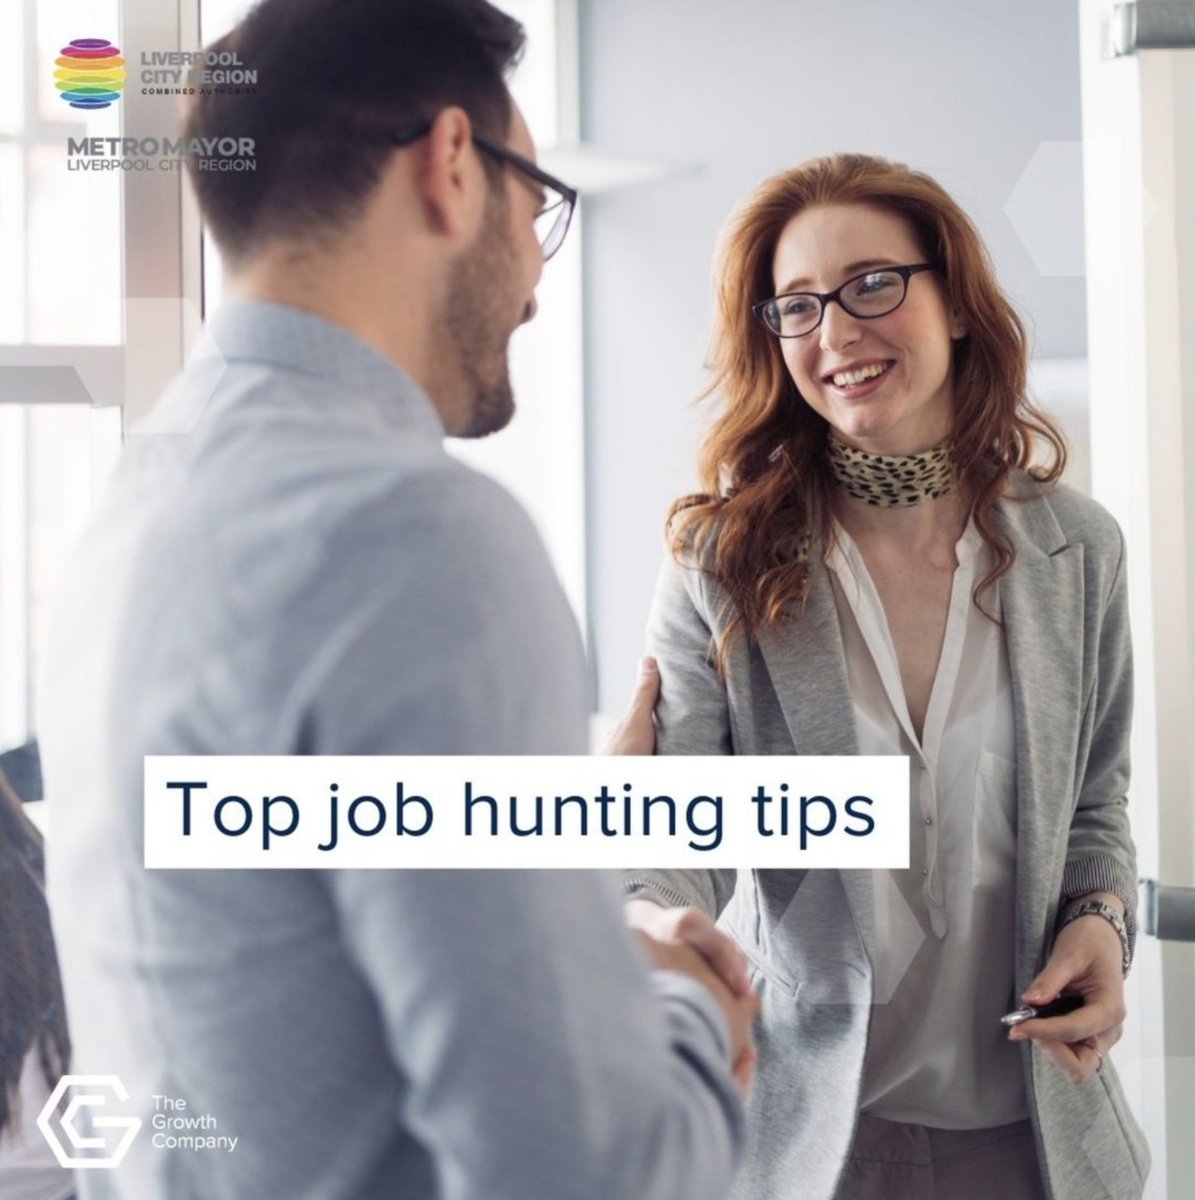 1. Tailor your CV and Cover Letters to specific job roles. 2. Don't rely solely on job websites 3. If you’ve made an application online and haven’t had a reply, give them a call. 4. Make sure you are applying for several jobs at once to maximise your chances. #jobhunting